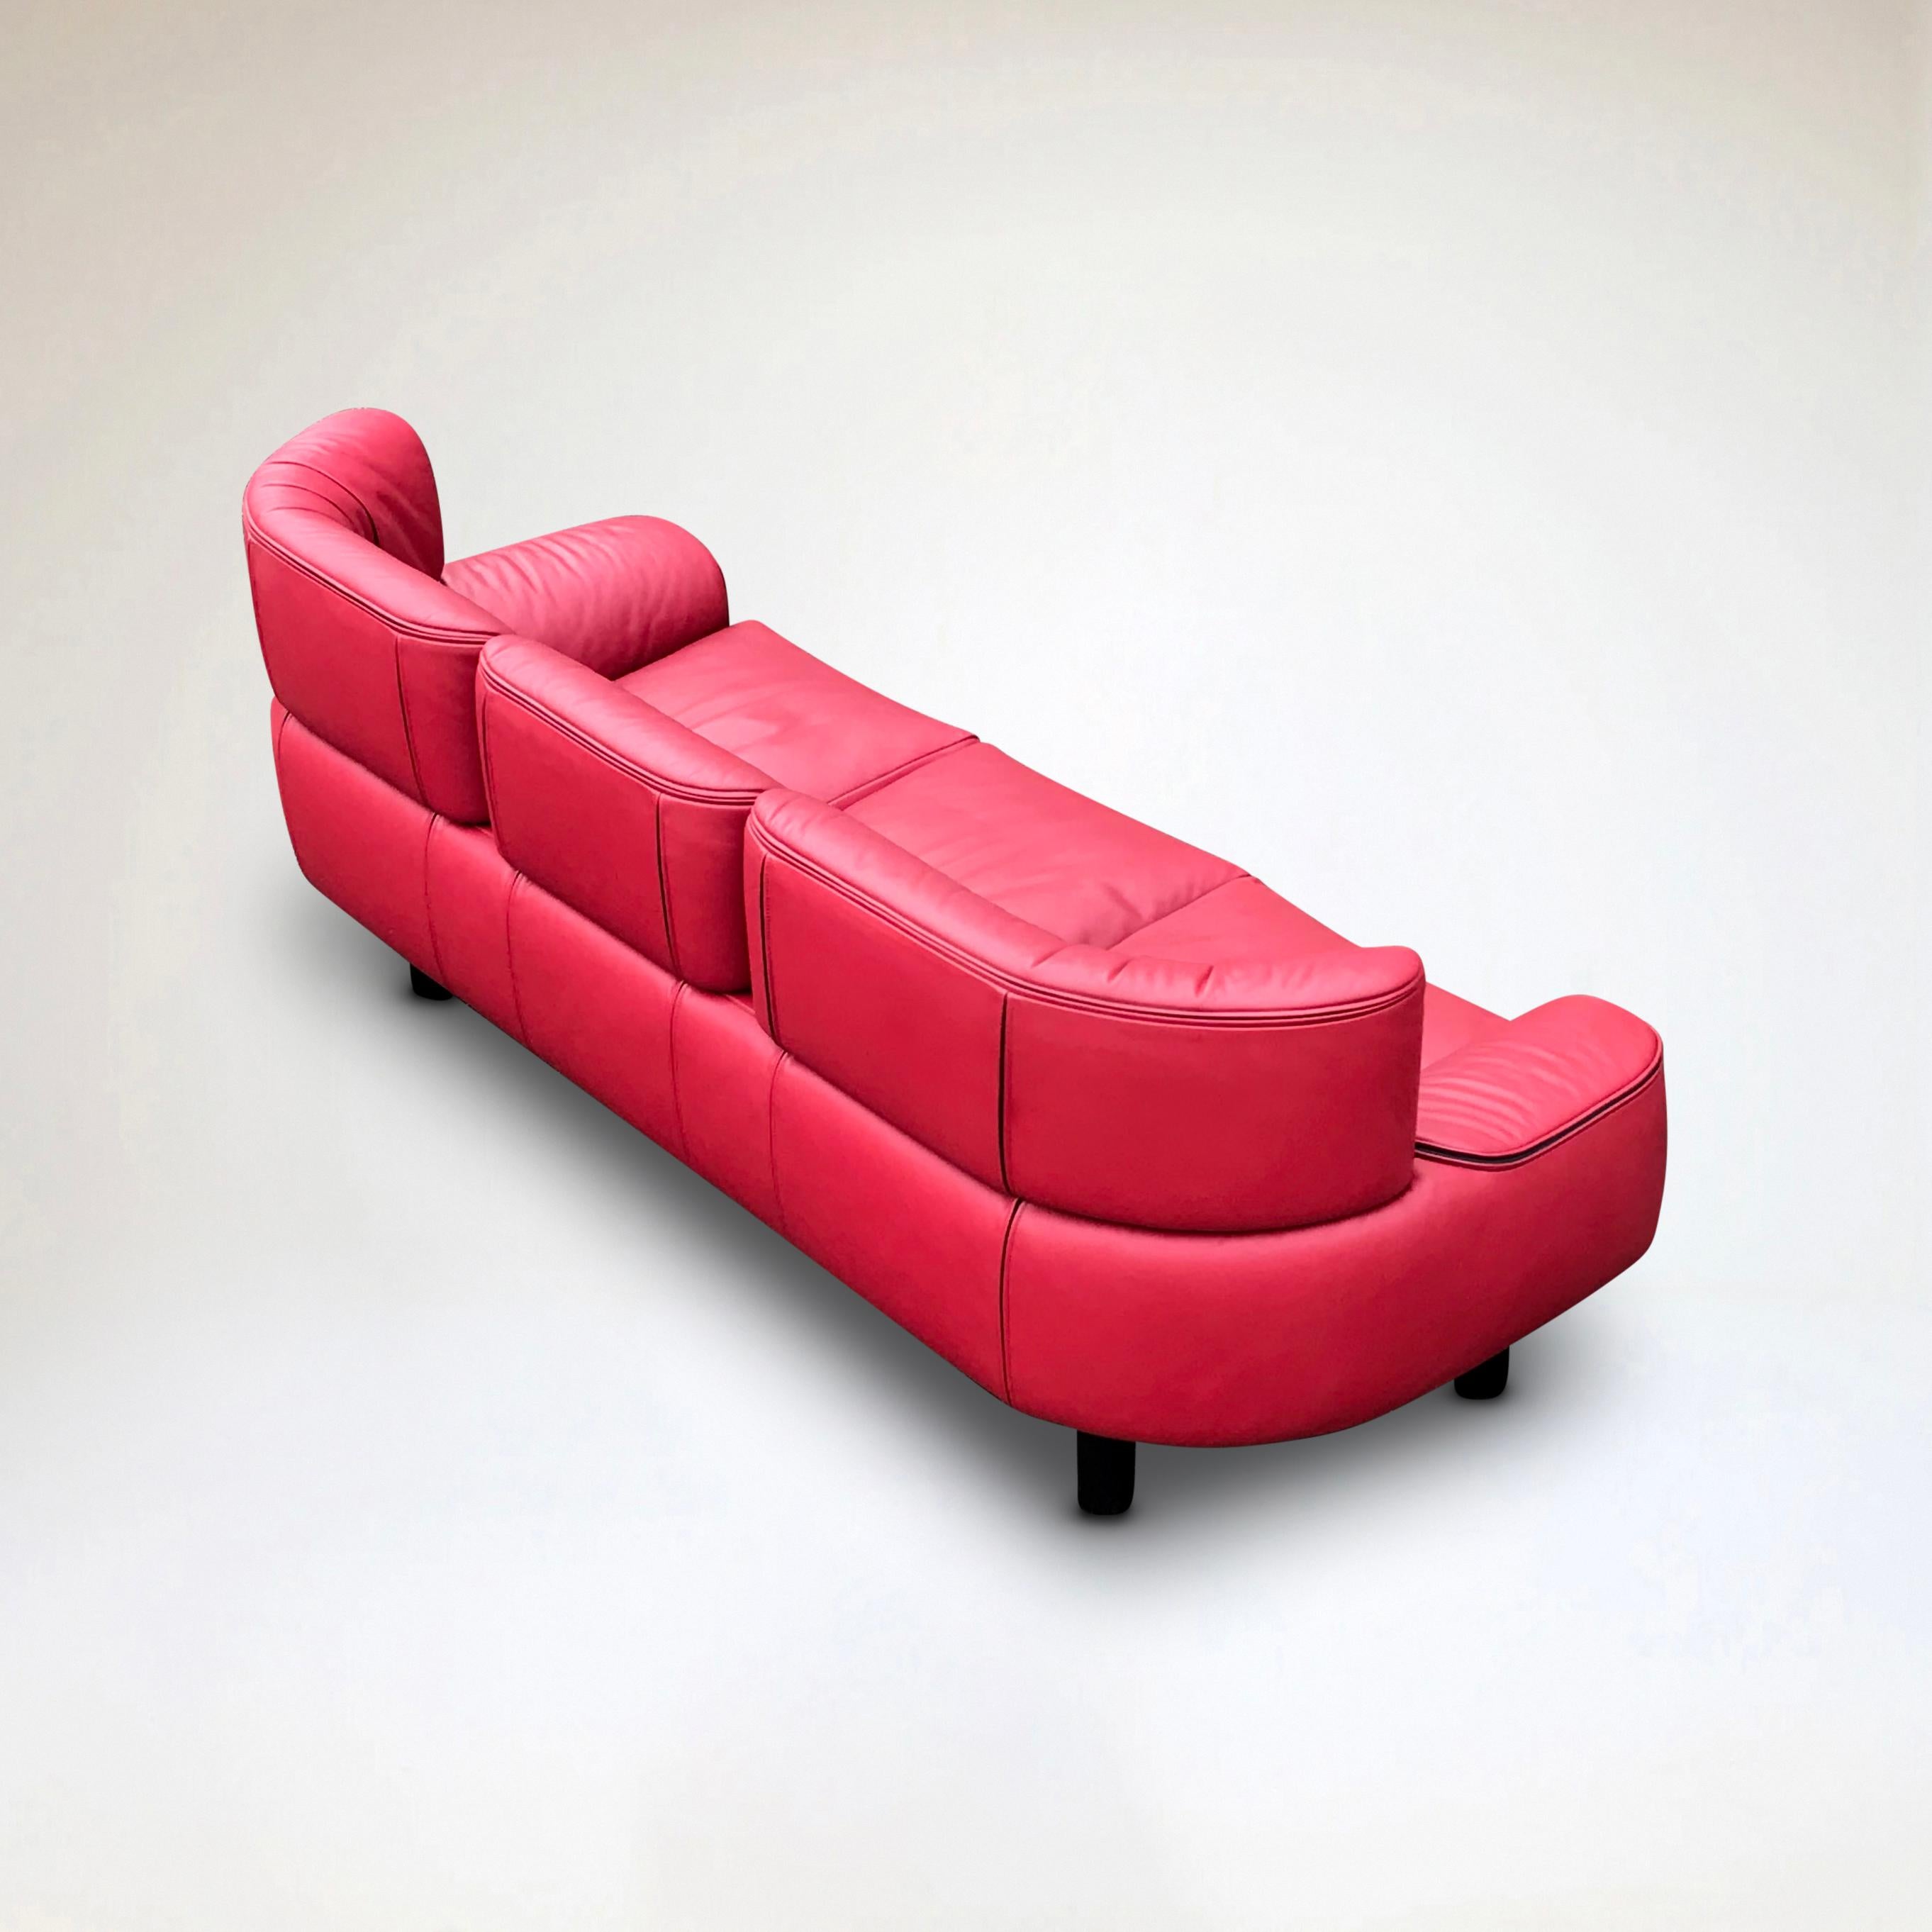 Late 20th Century Bull 3-seater red leather sofa by Gianfranco Frattini for Cassina 1987 For Sale